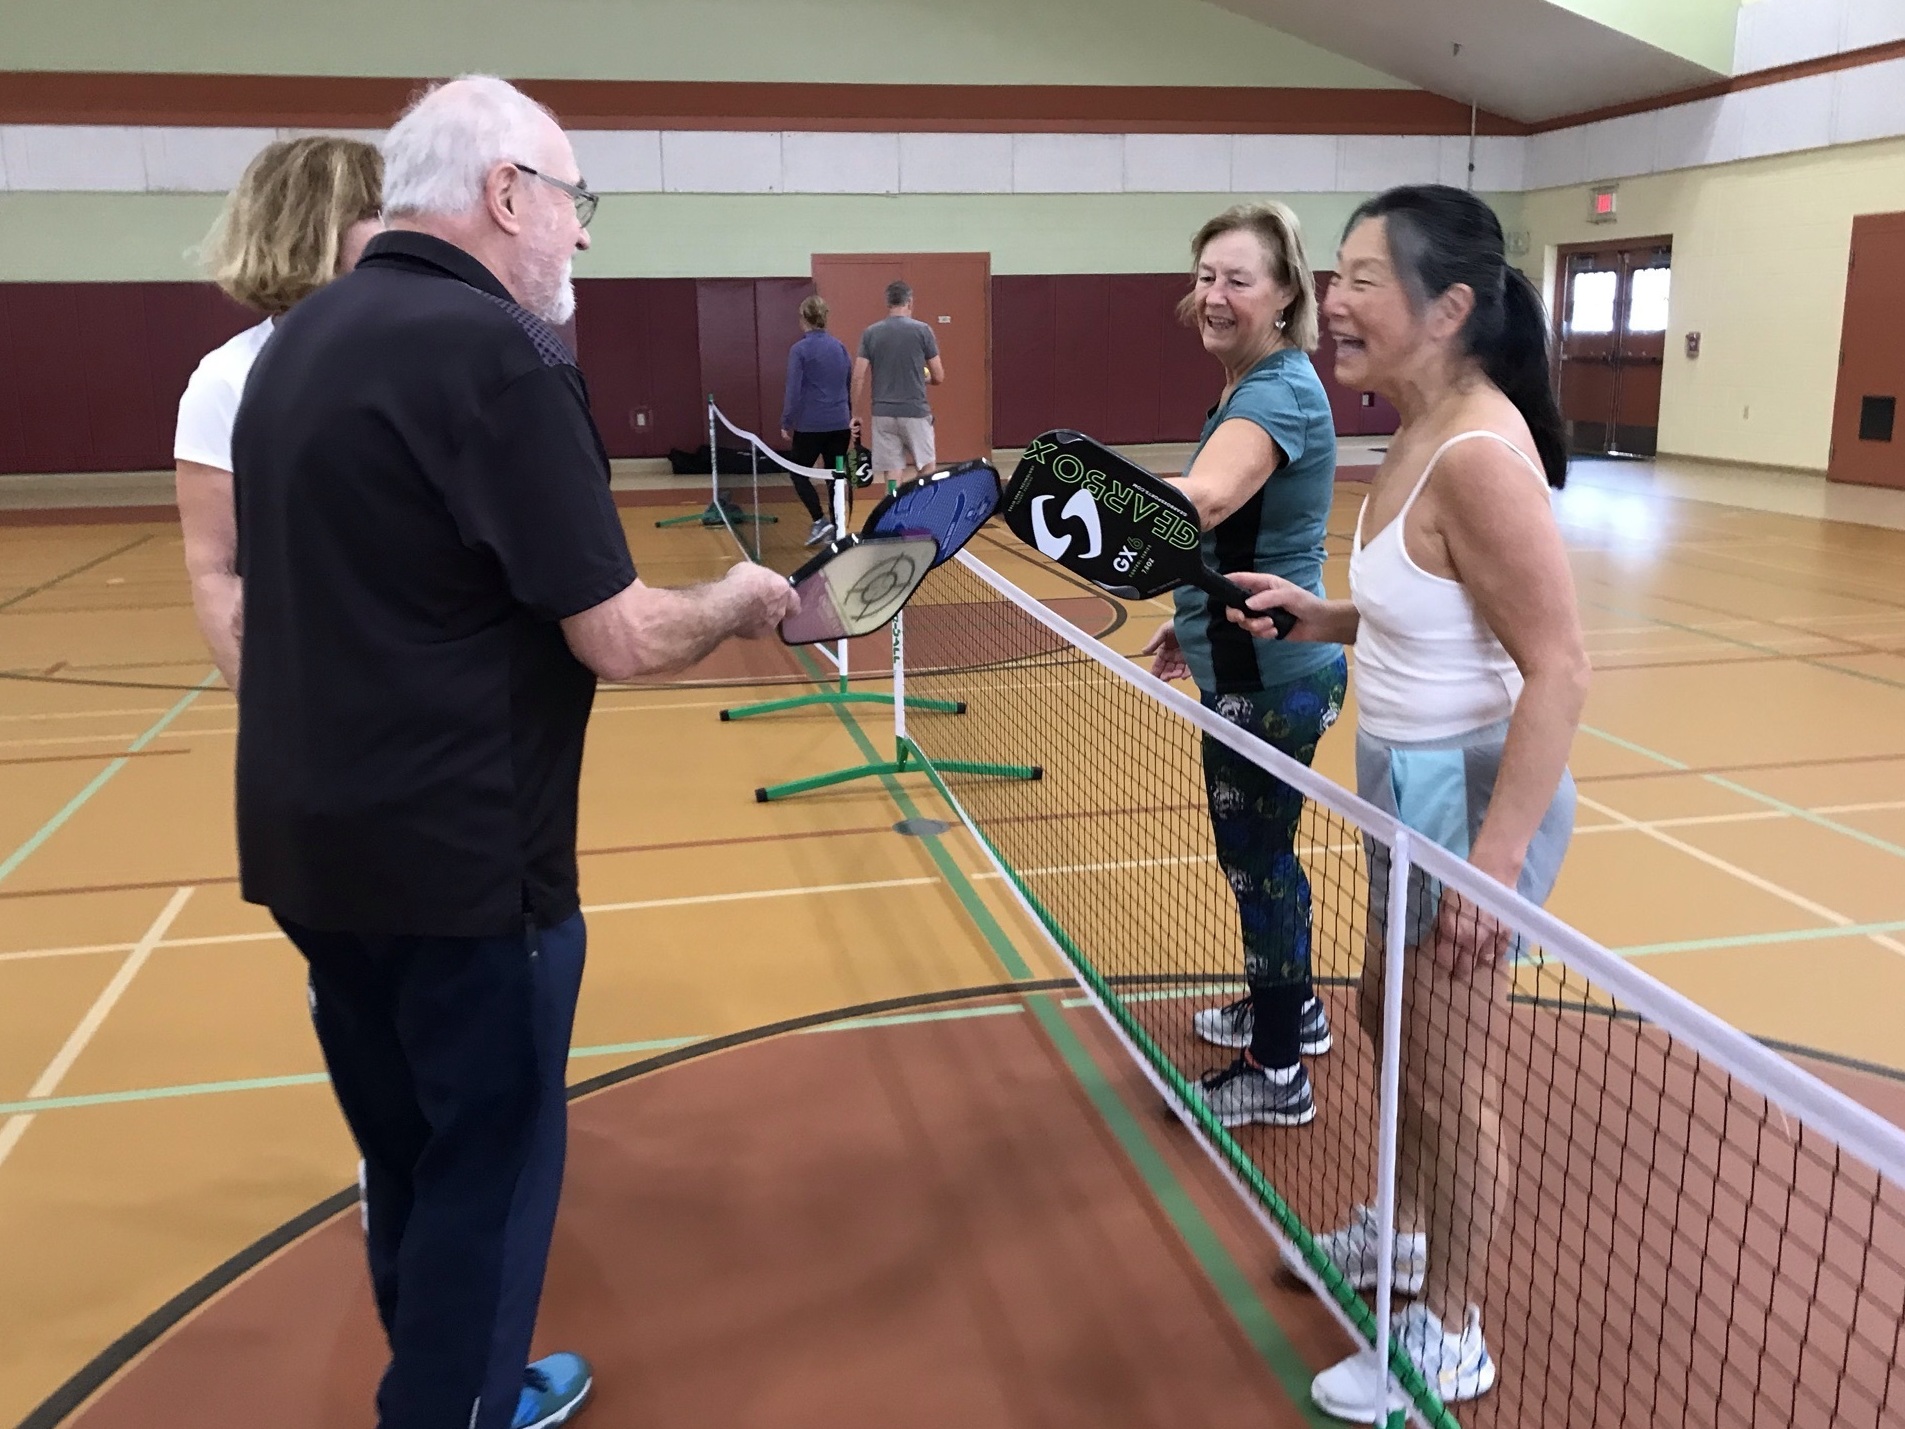 how to hold a pickleball paddle